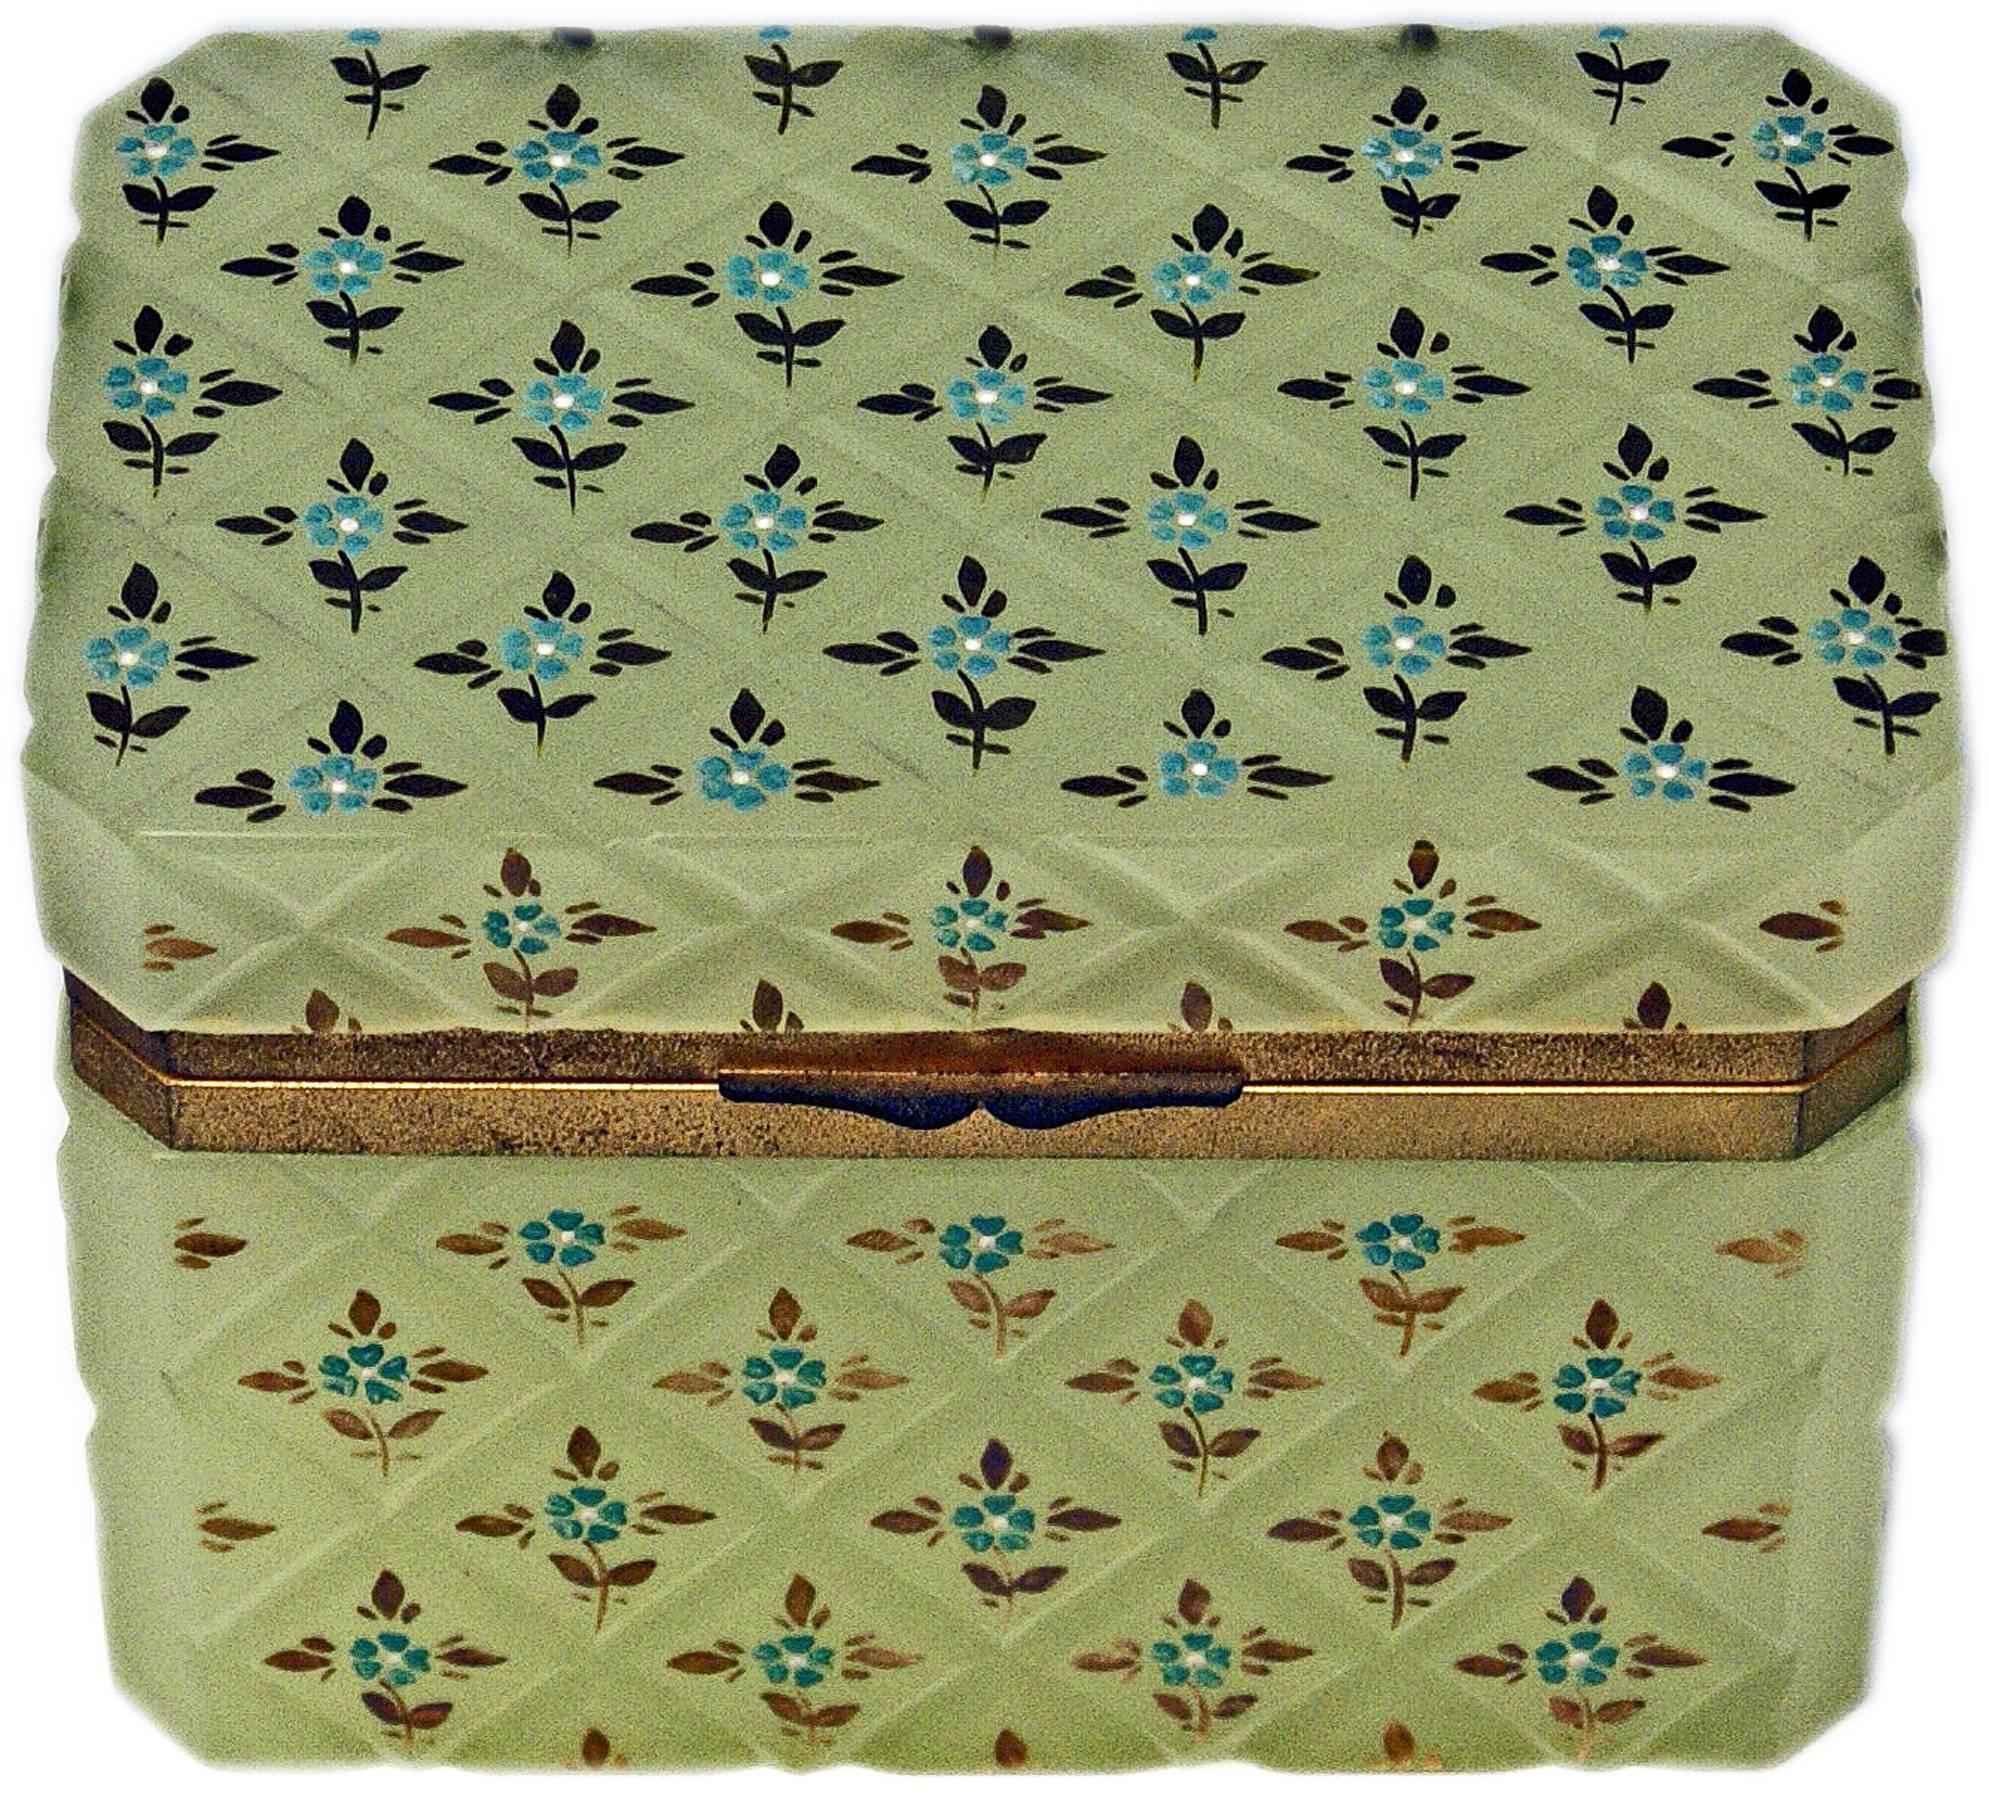 Specifications:
Opaline pastel green box with hinged lid having gilt bronze mountings or the lid closes properly. The casket's surface with splayed edges has an overall crosshatched pattern with small flower's blossoms surrounded by golden leaves